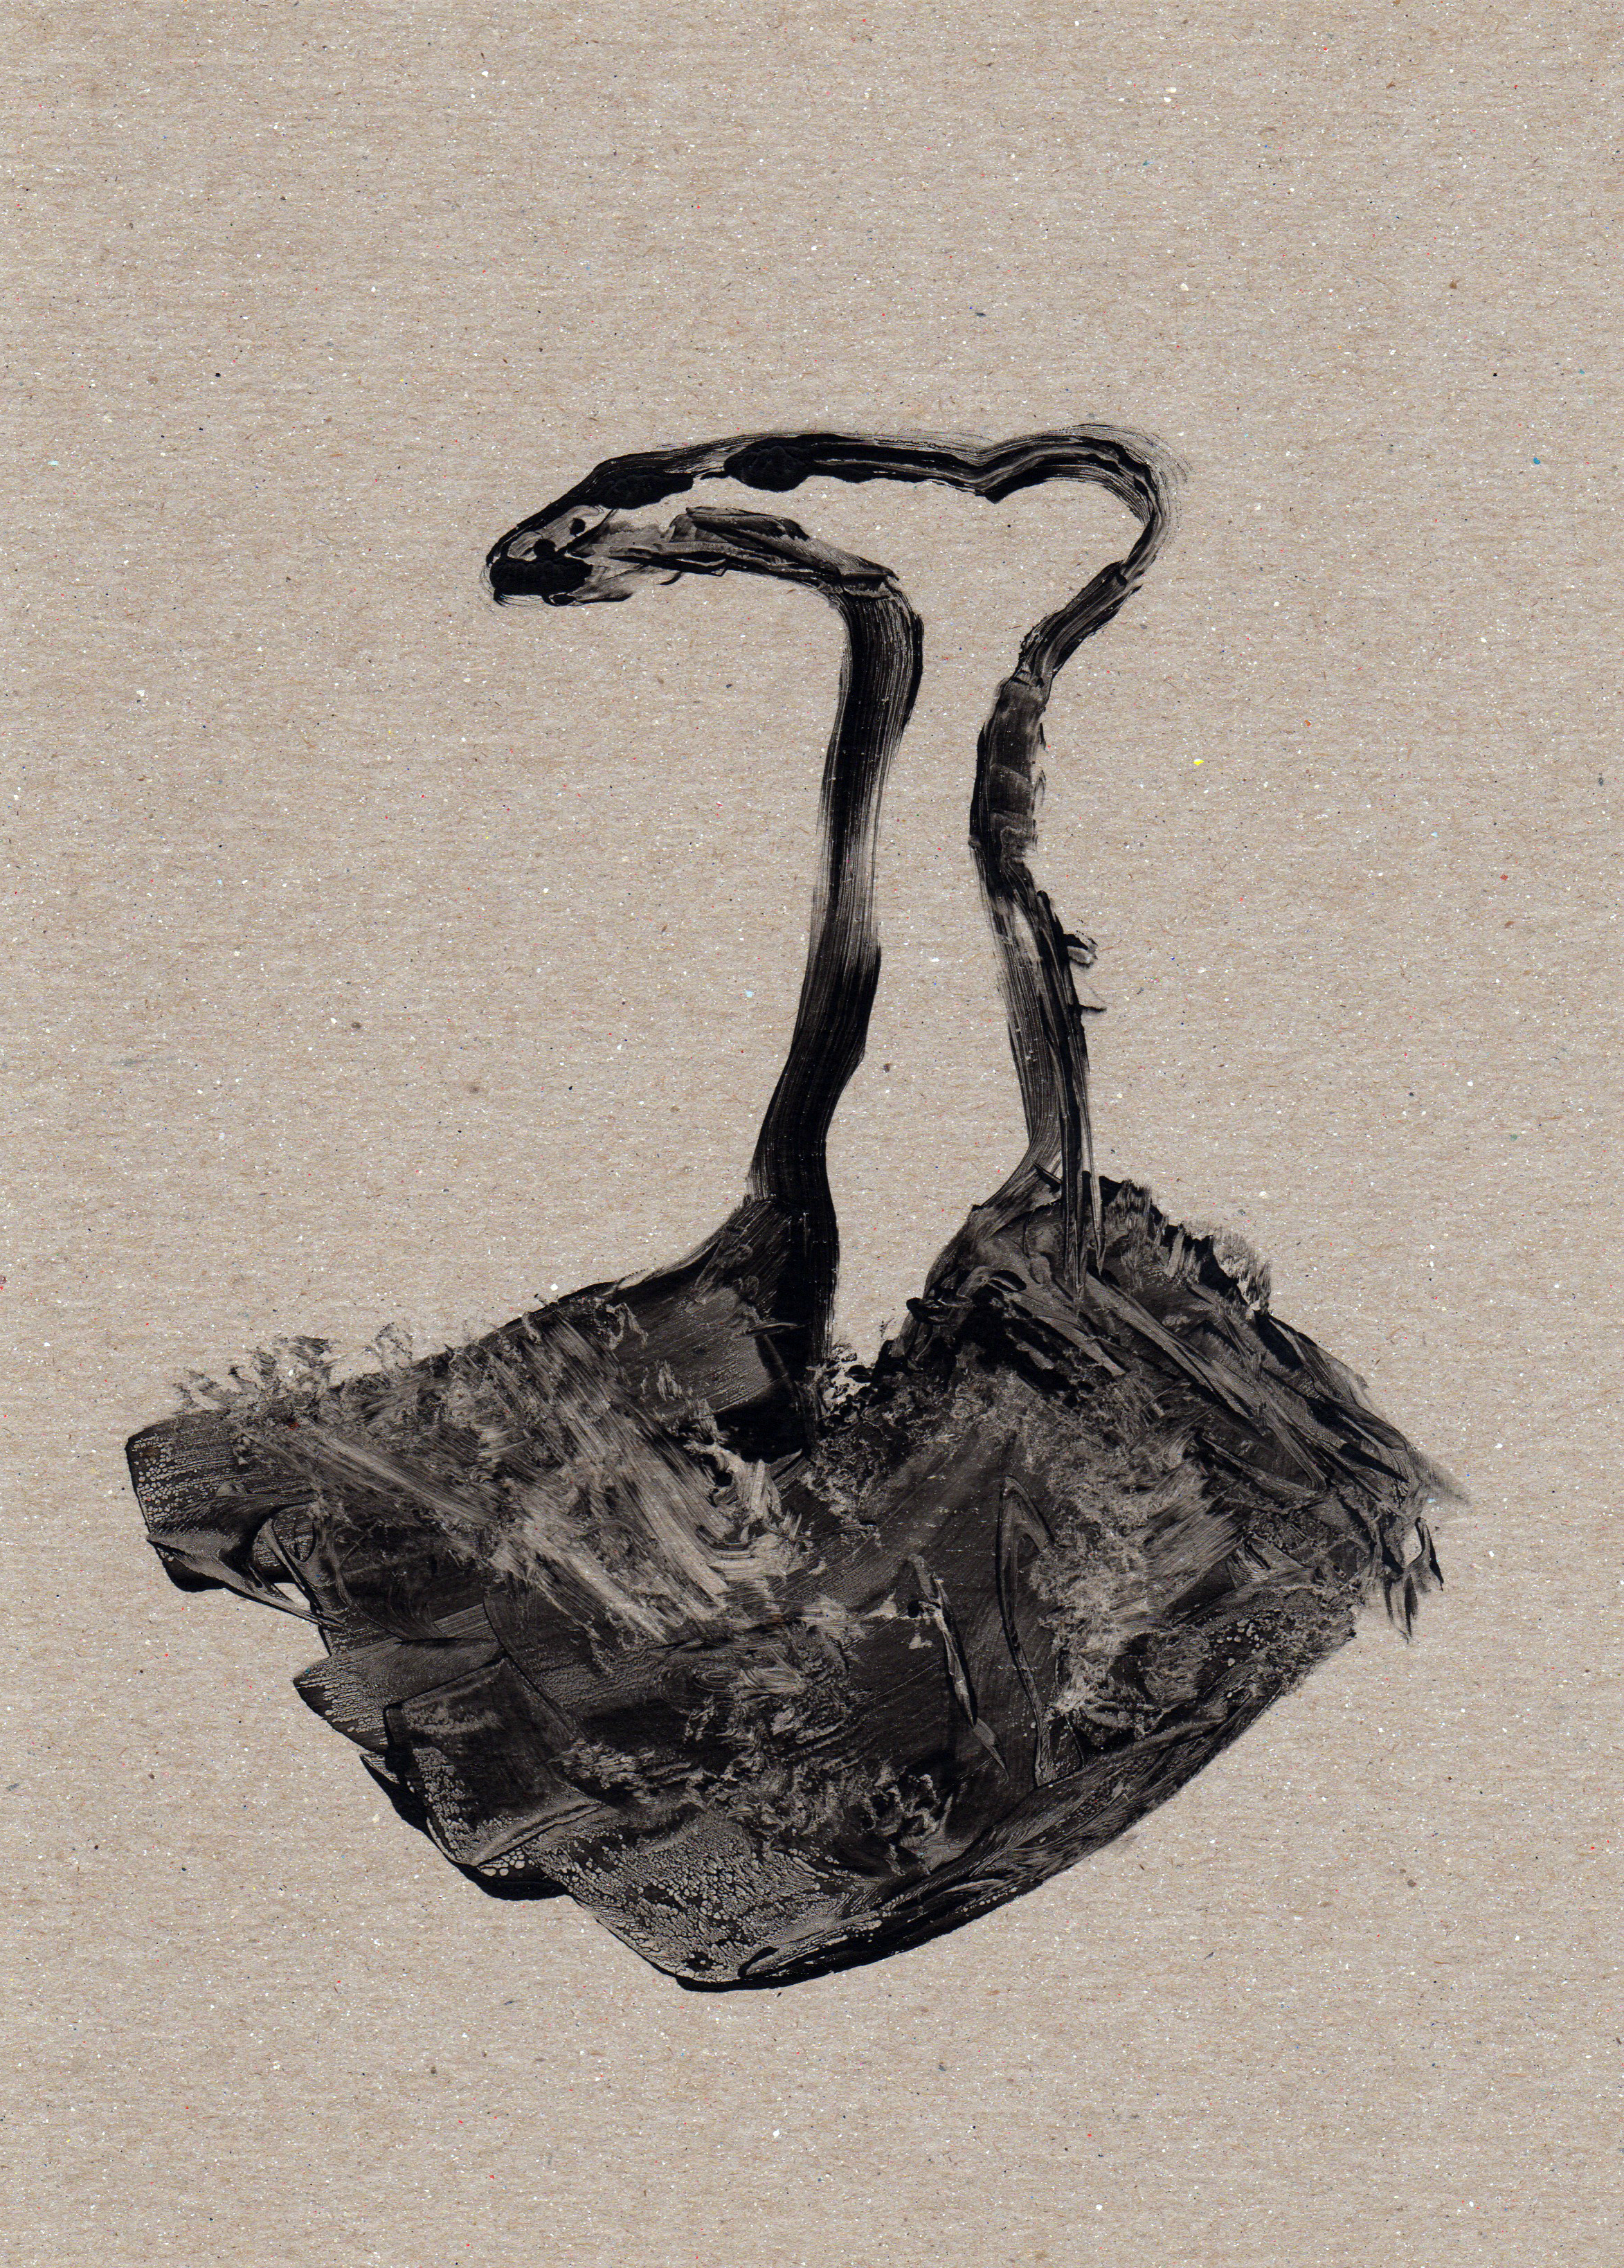 Untitled One Foot Out of the Grave, 2014, gelatin monotype, 11x8 inches